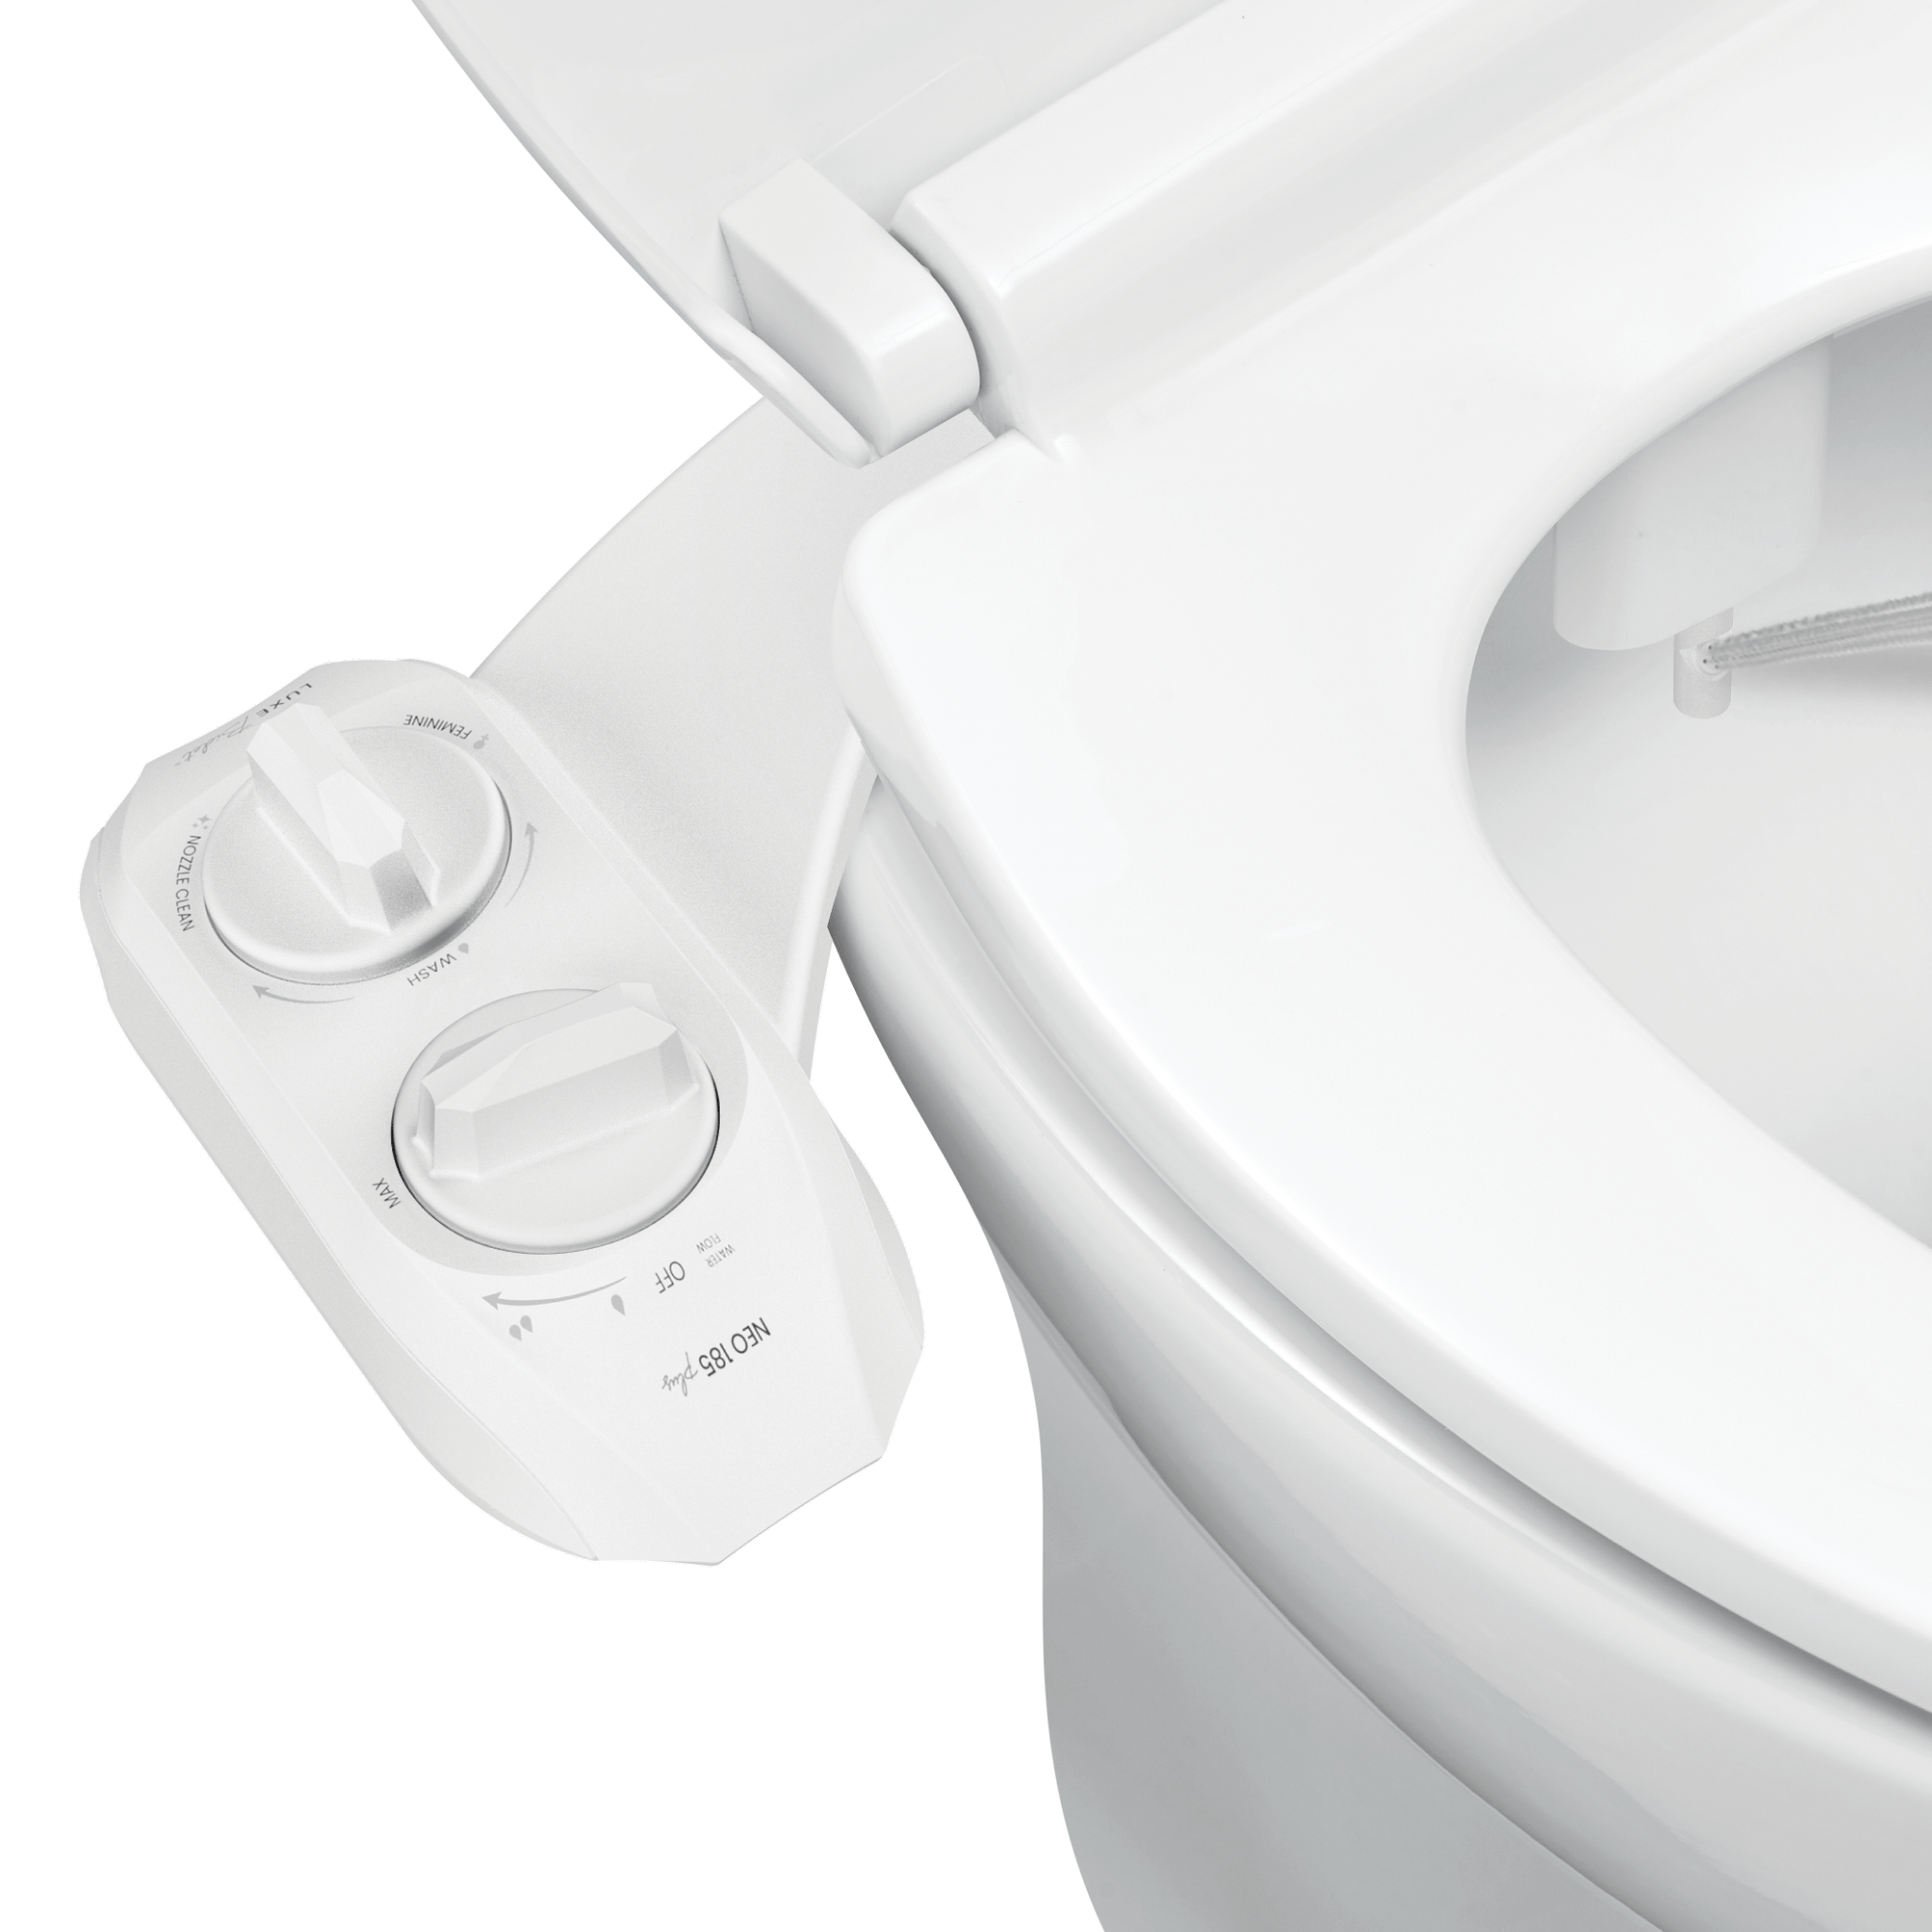 NEO 185 Plus: Imperfect Packaging - NEO 185 Plus White installed on a toilet with water spraying from nozzles